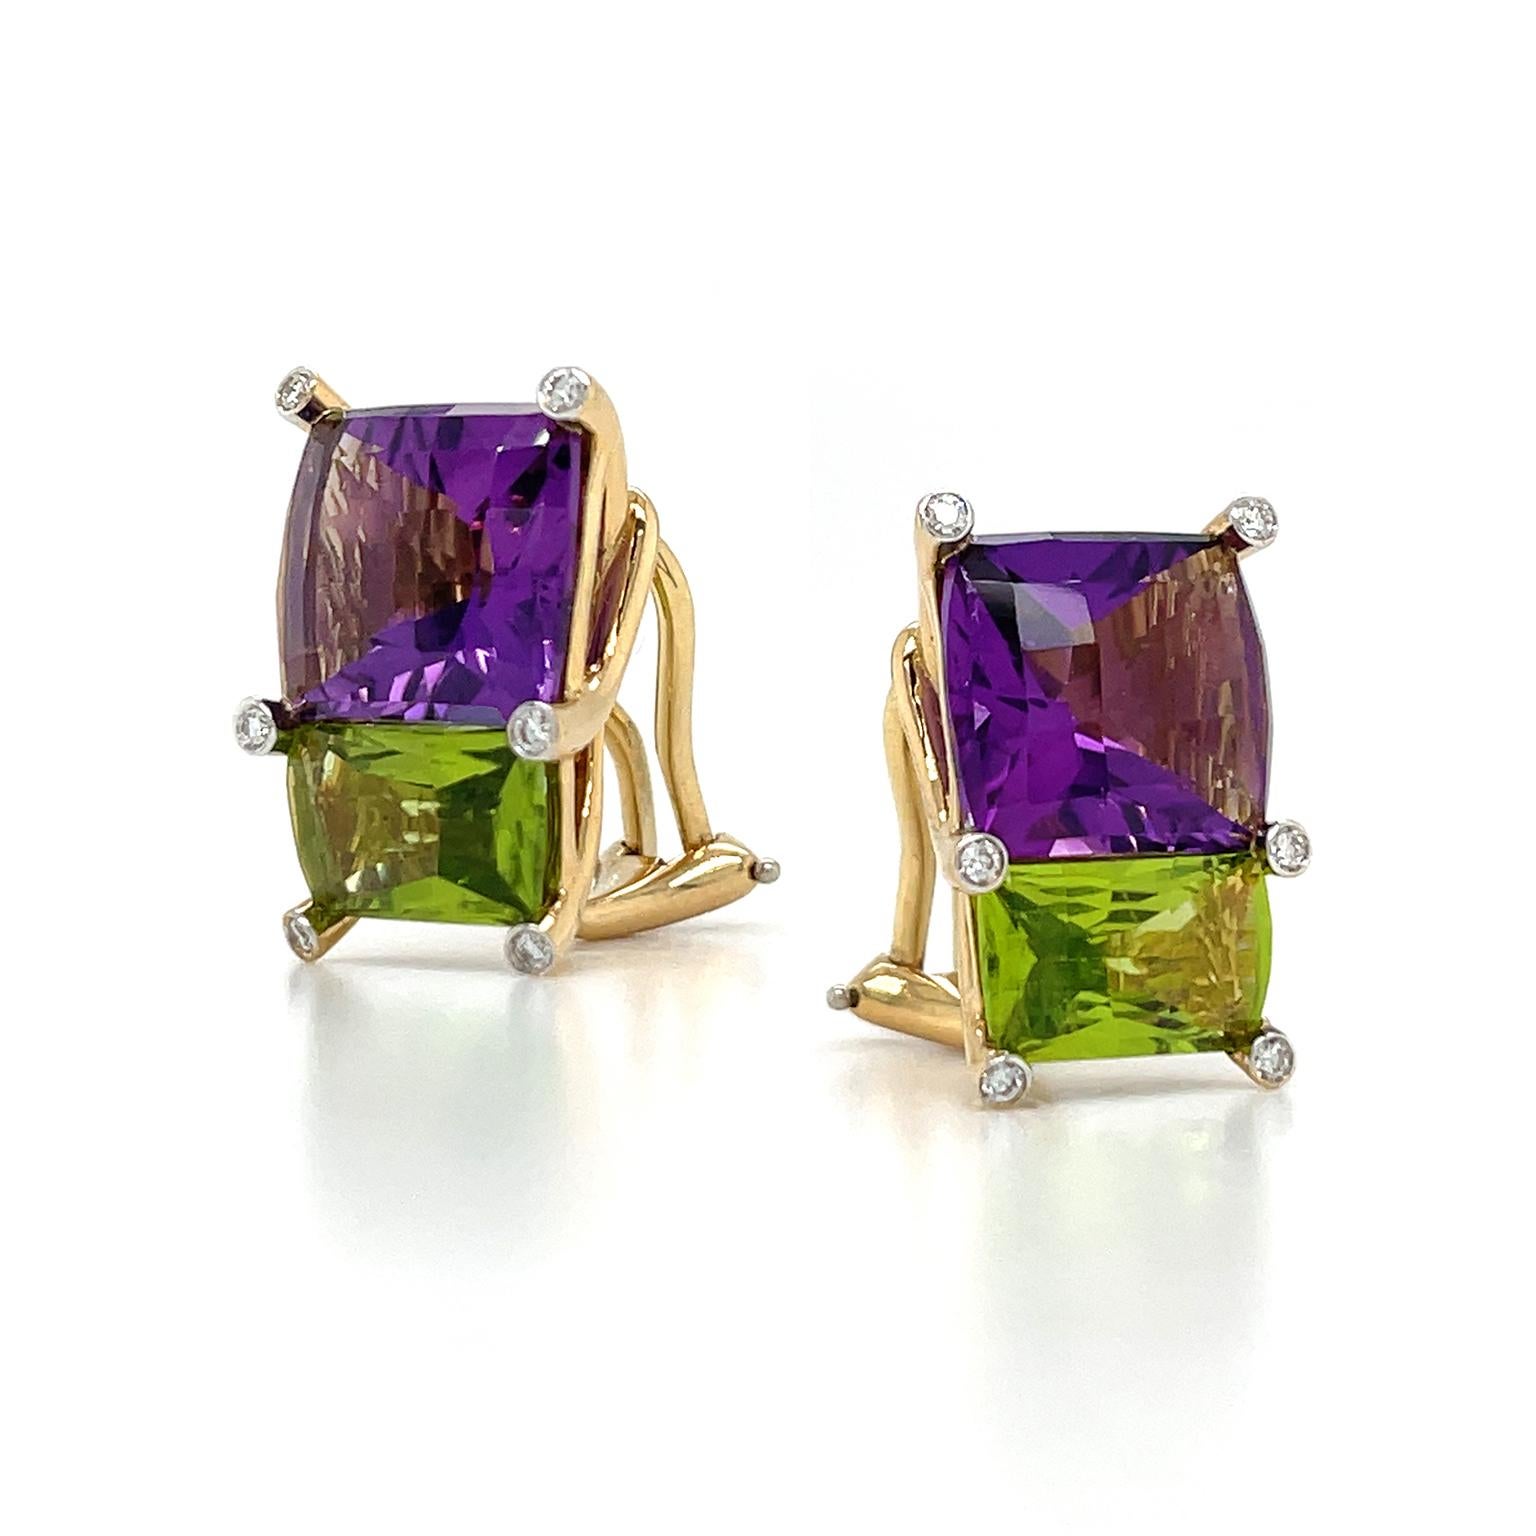 Harmonizing hues from amethyst and peridot flicker in these earrings. Both jewels are in a checkerboard cut, producing a unique light and depth from each. Plum undertones and lavender shades are lifted from the amethyst at the top. Similar from a